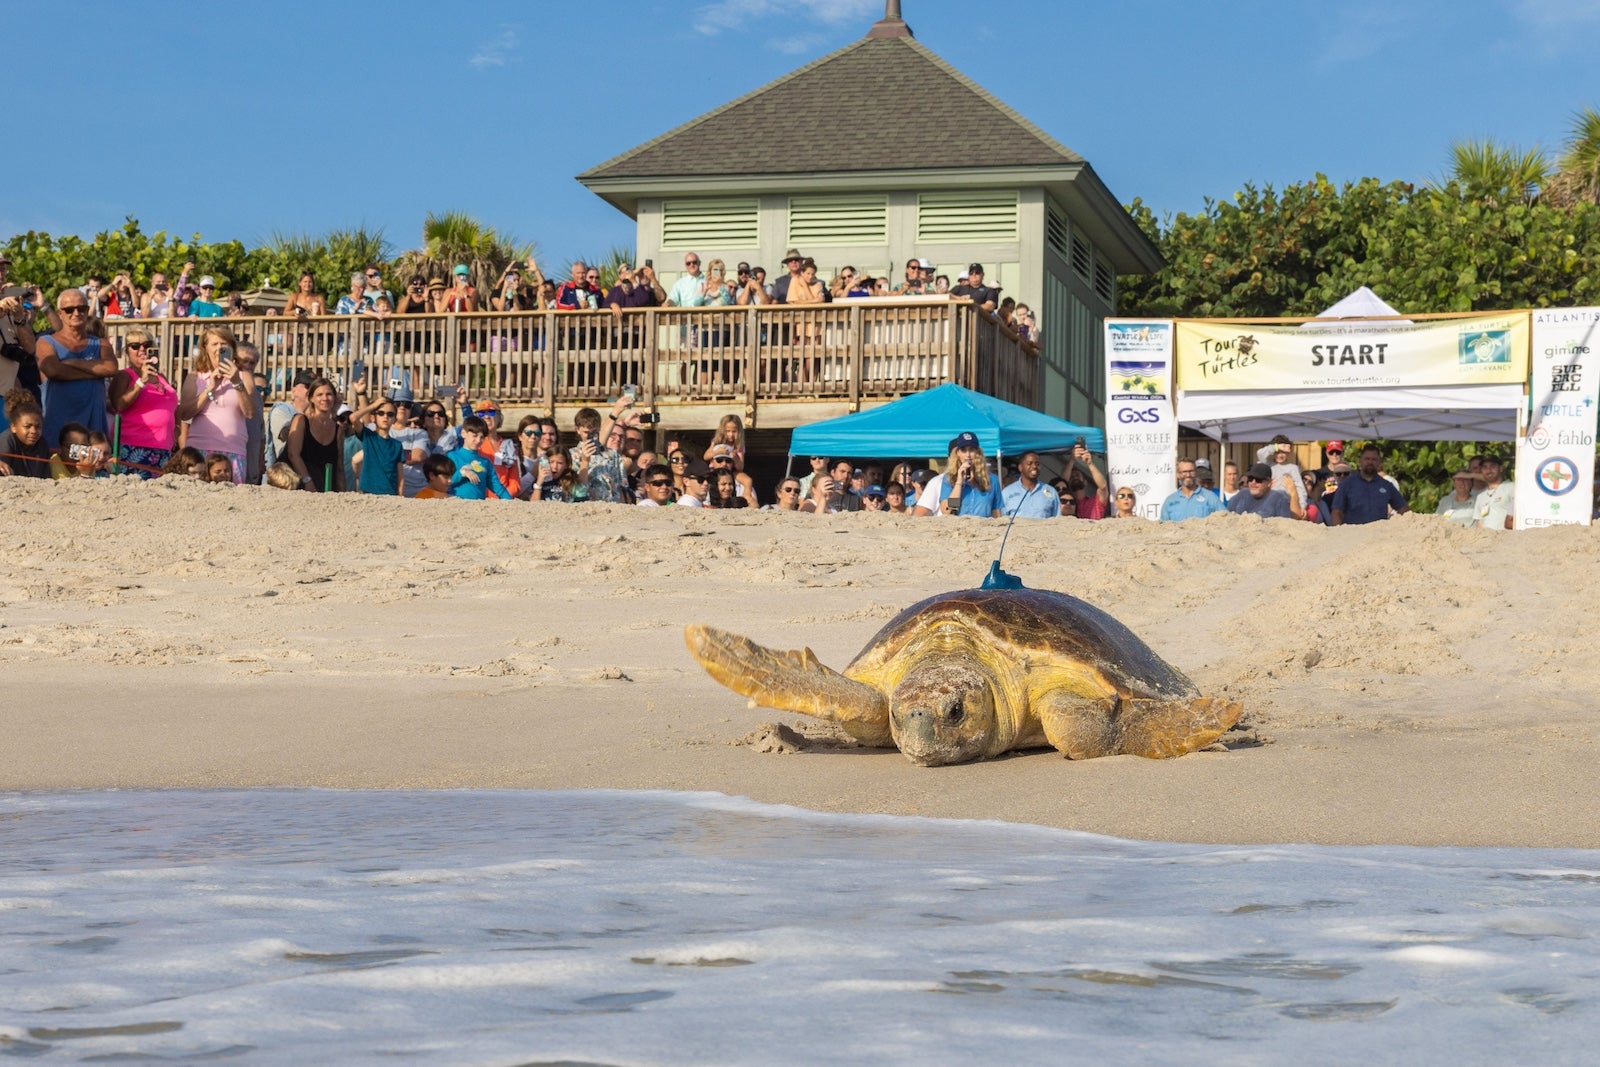 Teams from Disney Conservation and the Sea Turtle Conservancy released two sea turtles on July 29, 2023, as part of the 16th annual Tour de Turtles event at Disney’s Vero Beach Resort.